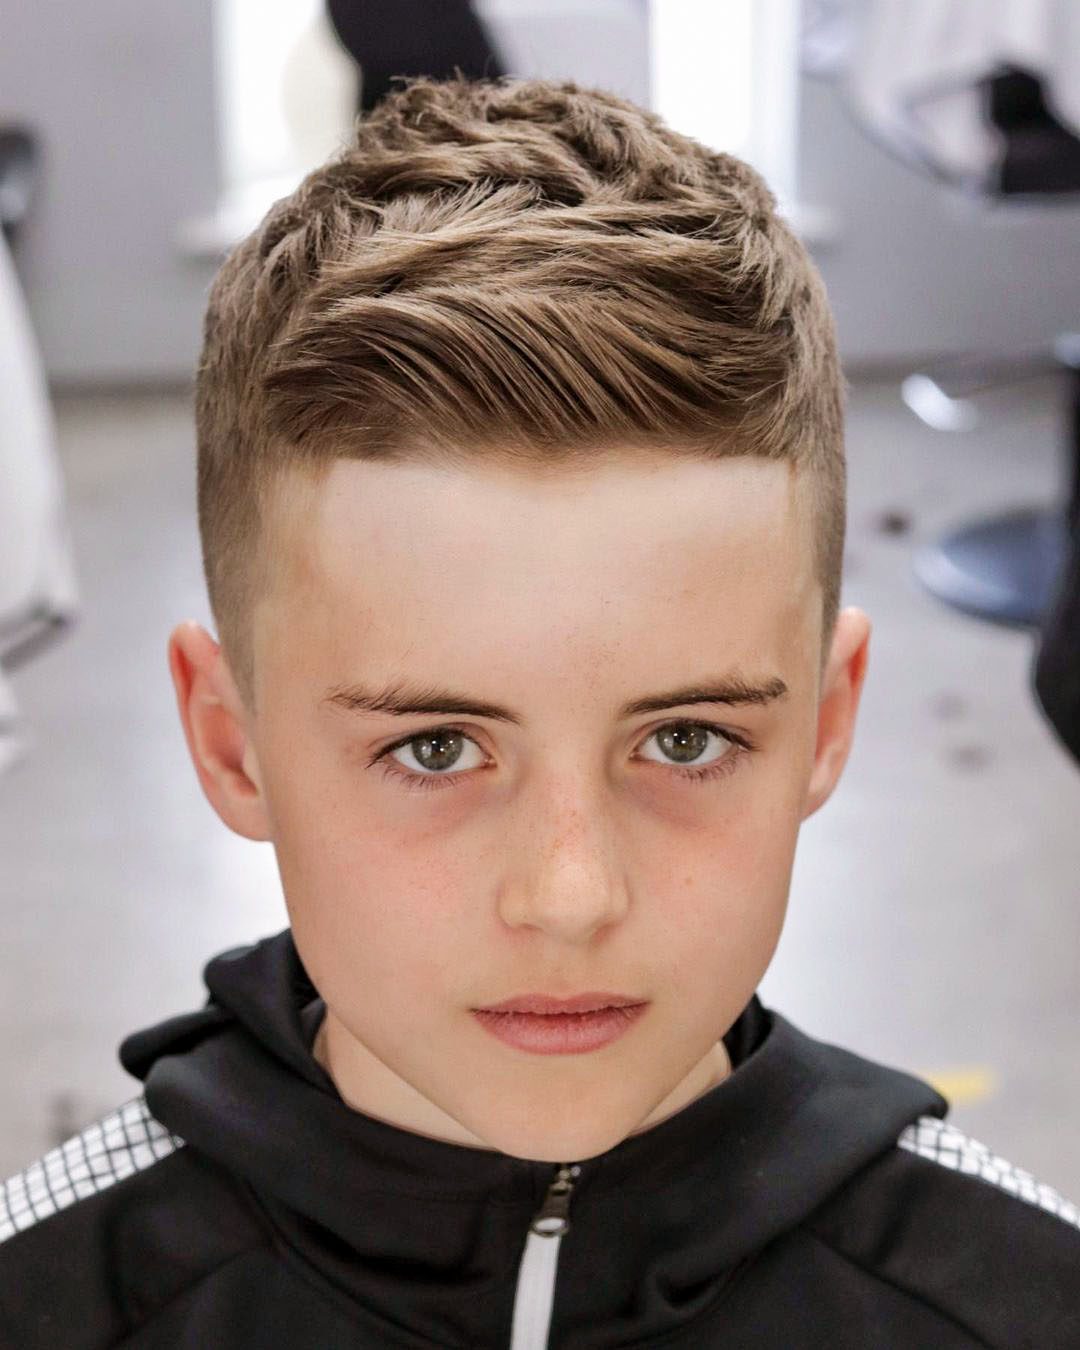 Top 48 image haircuts for boys with straight hair 